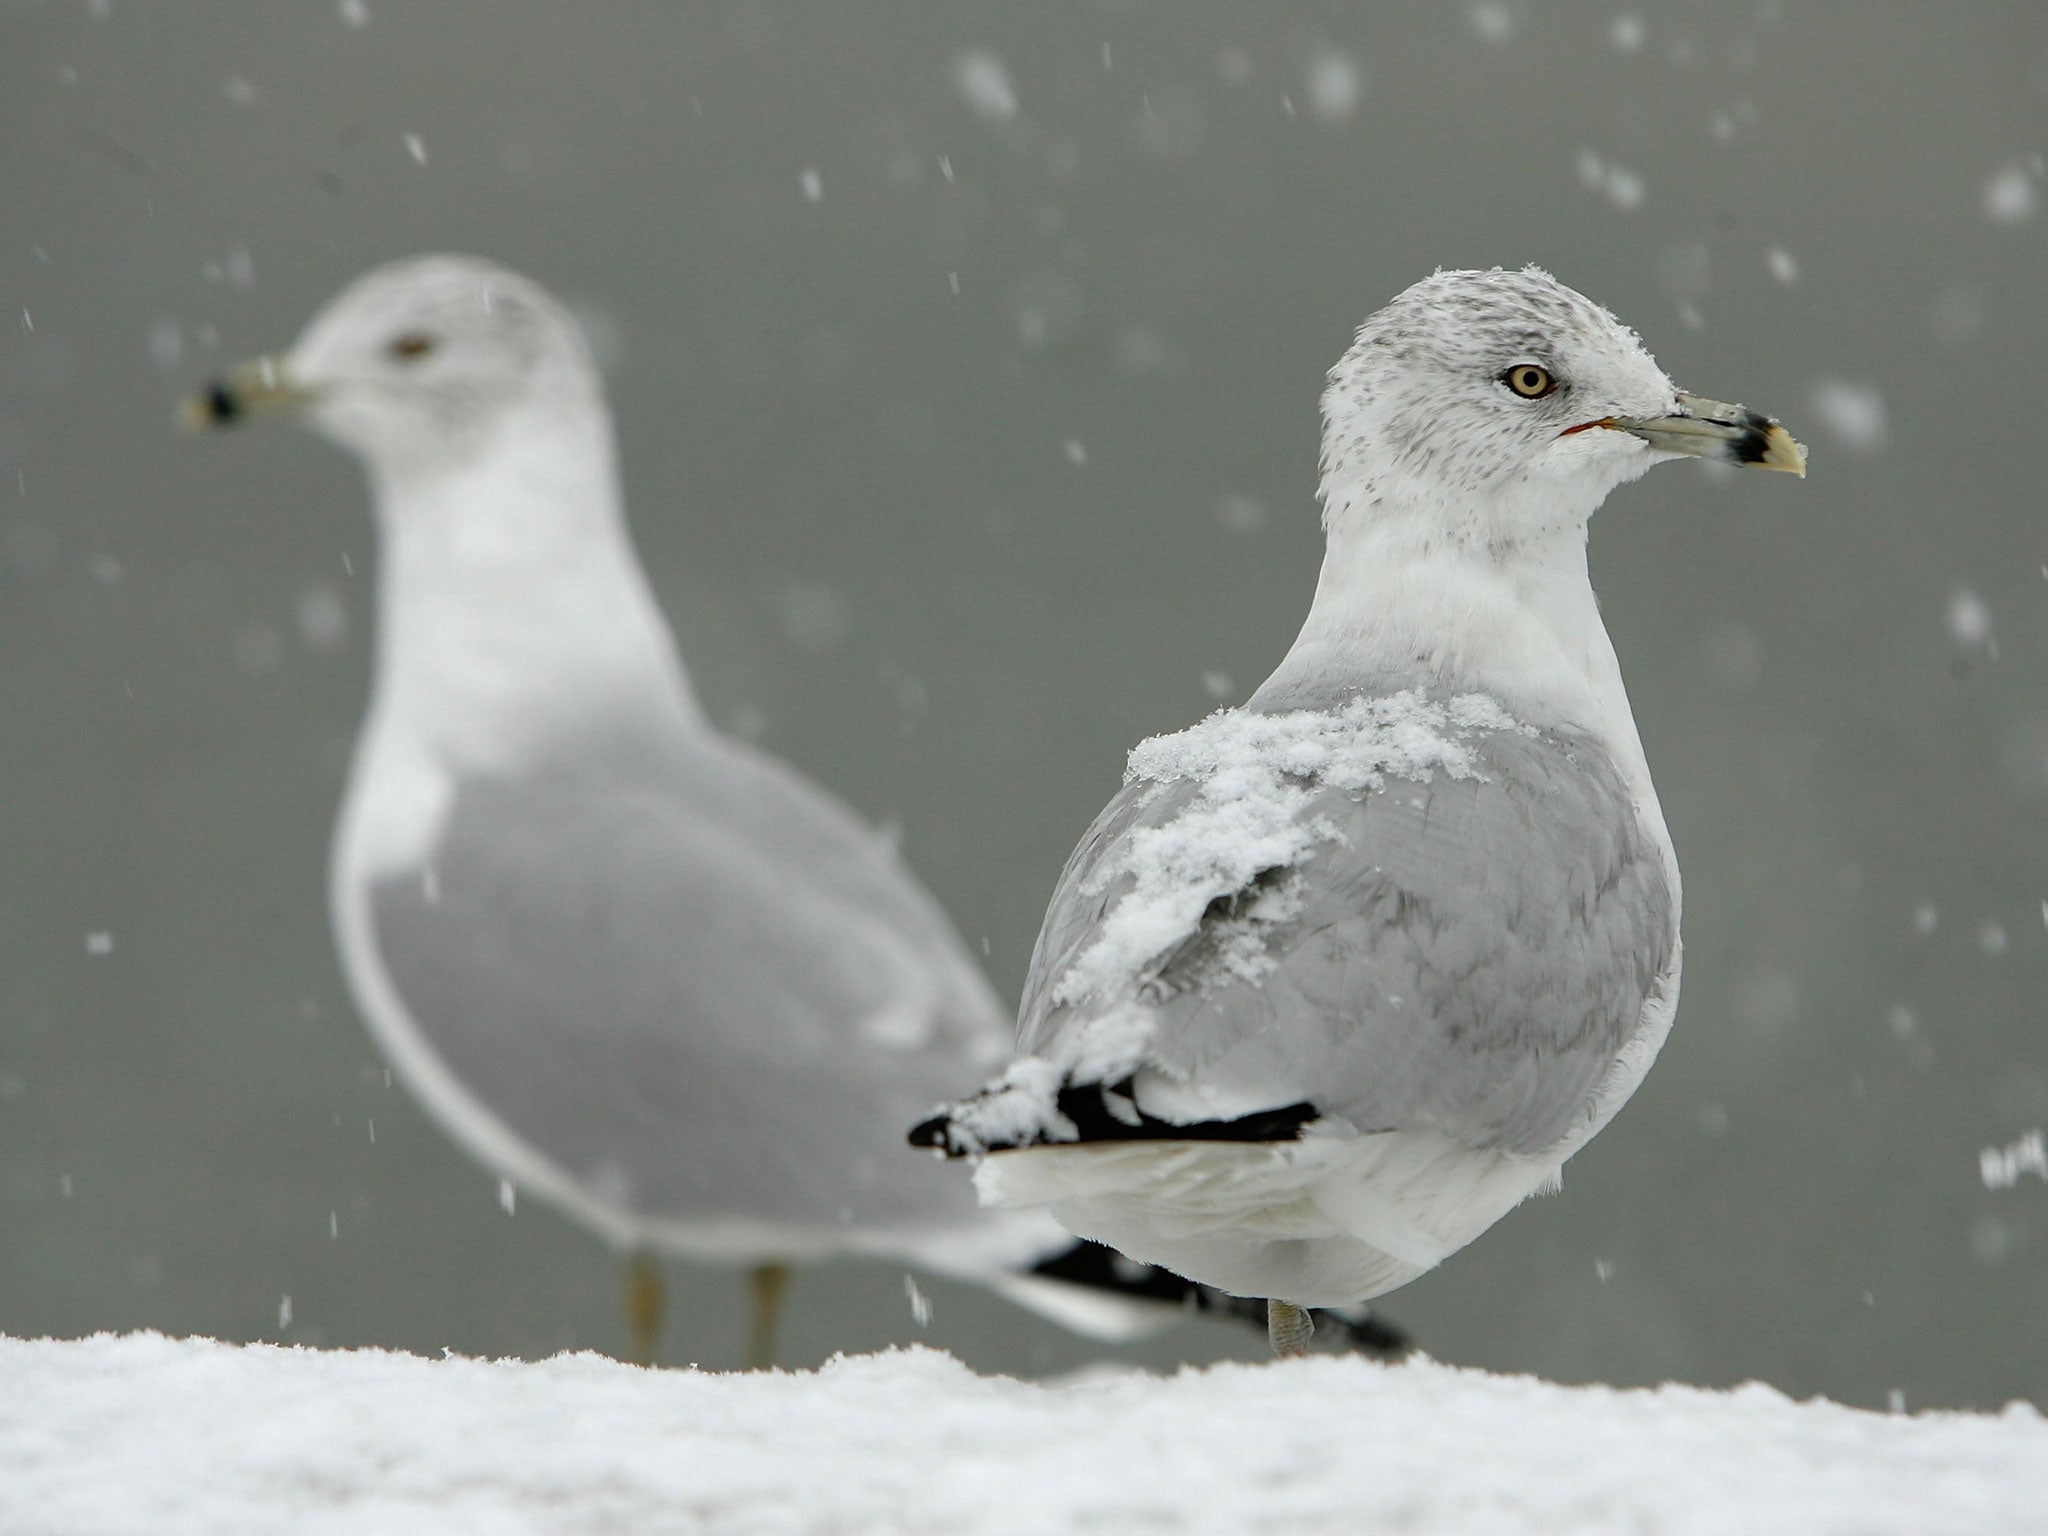 A dusting of snow sits on the heads and backs of Herring Gulls during a heavy snowfall near the U.S. Capitol January 17, 2007 in Washington, DC. The region is expected to get two to four inches of snow during the day that will turn into freezing rain by e